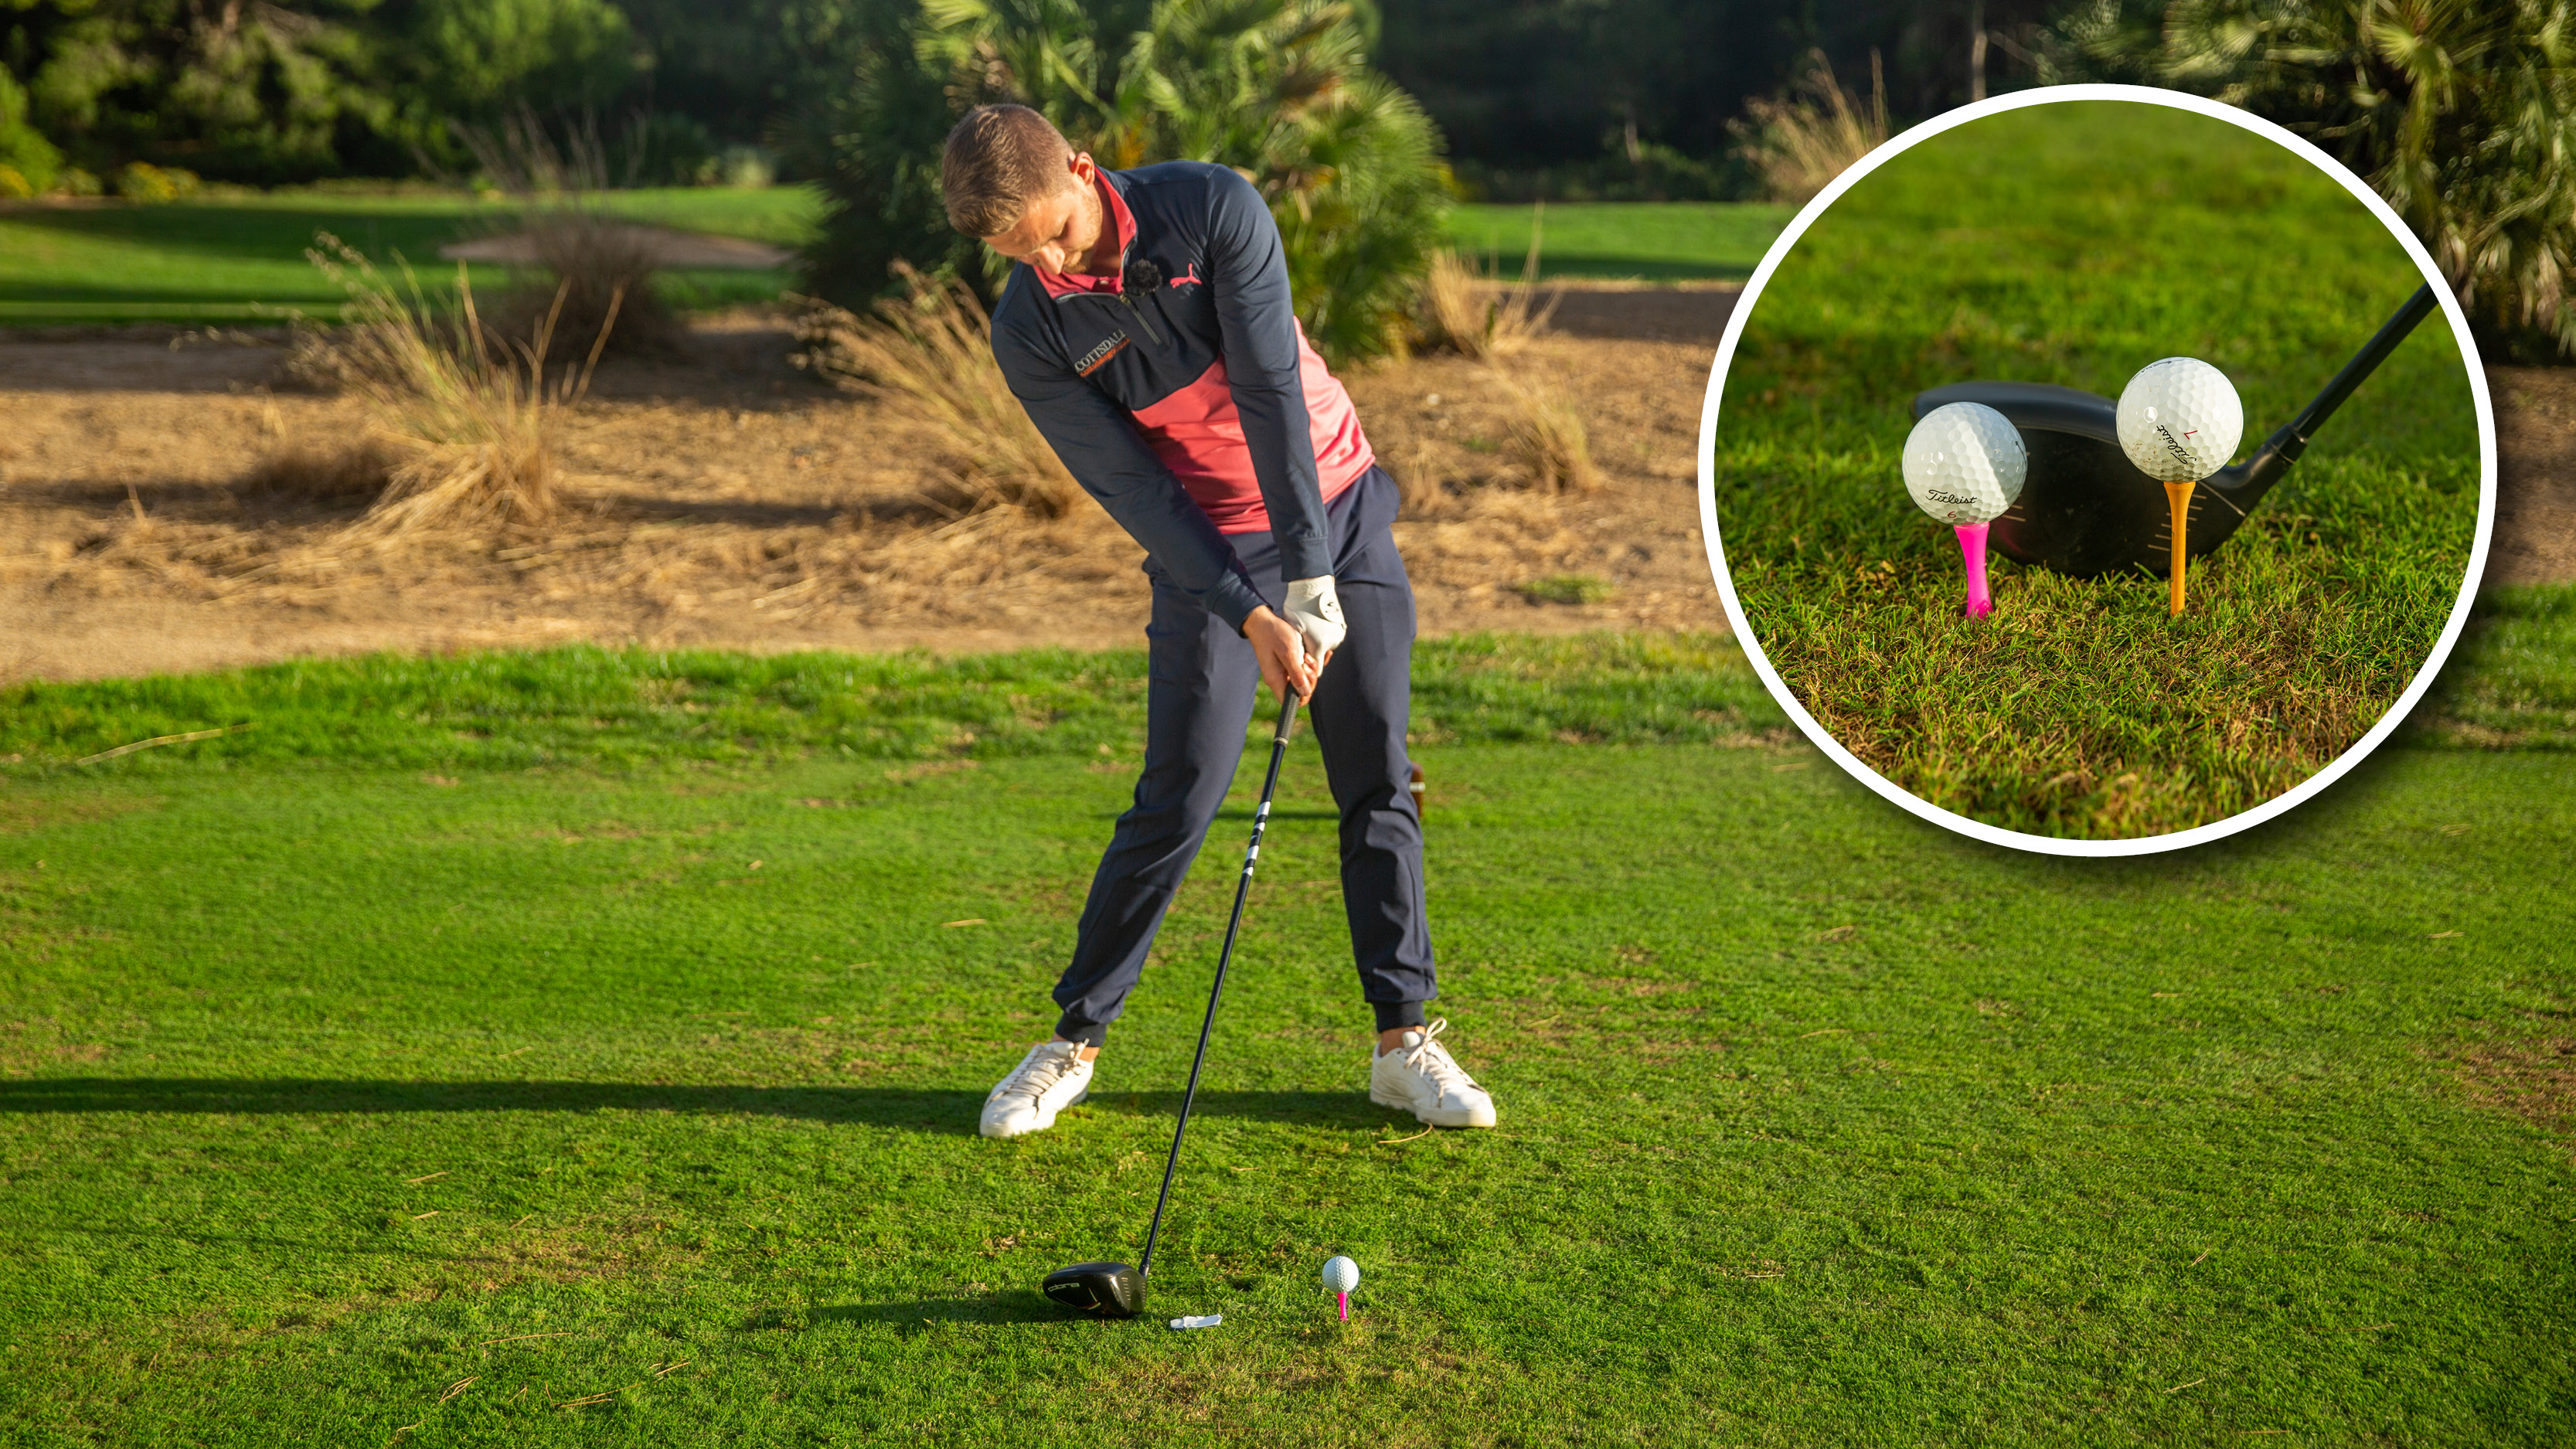 Golf Tips: Hitting Driver and Getting off the Tee